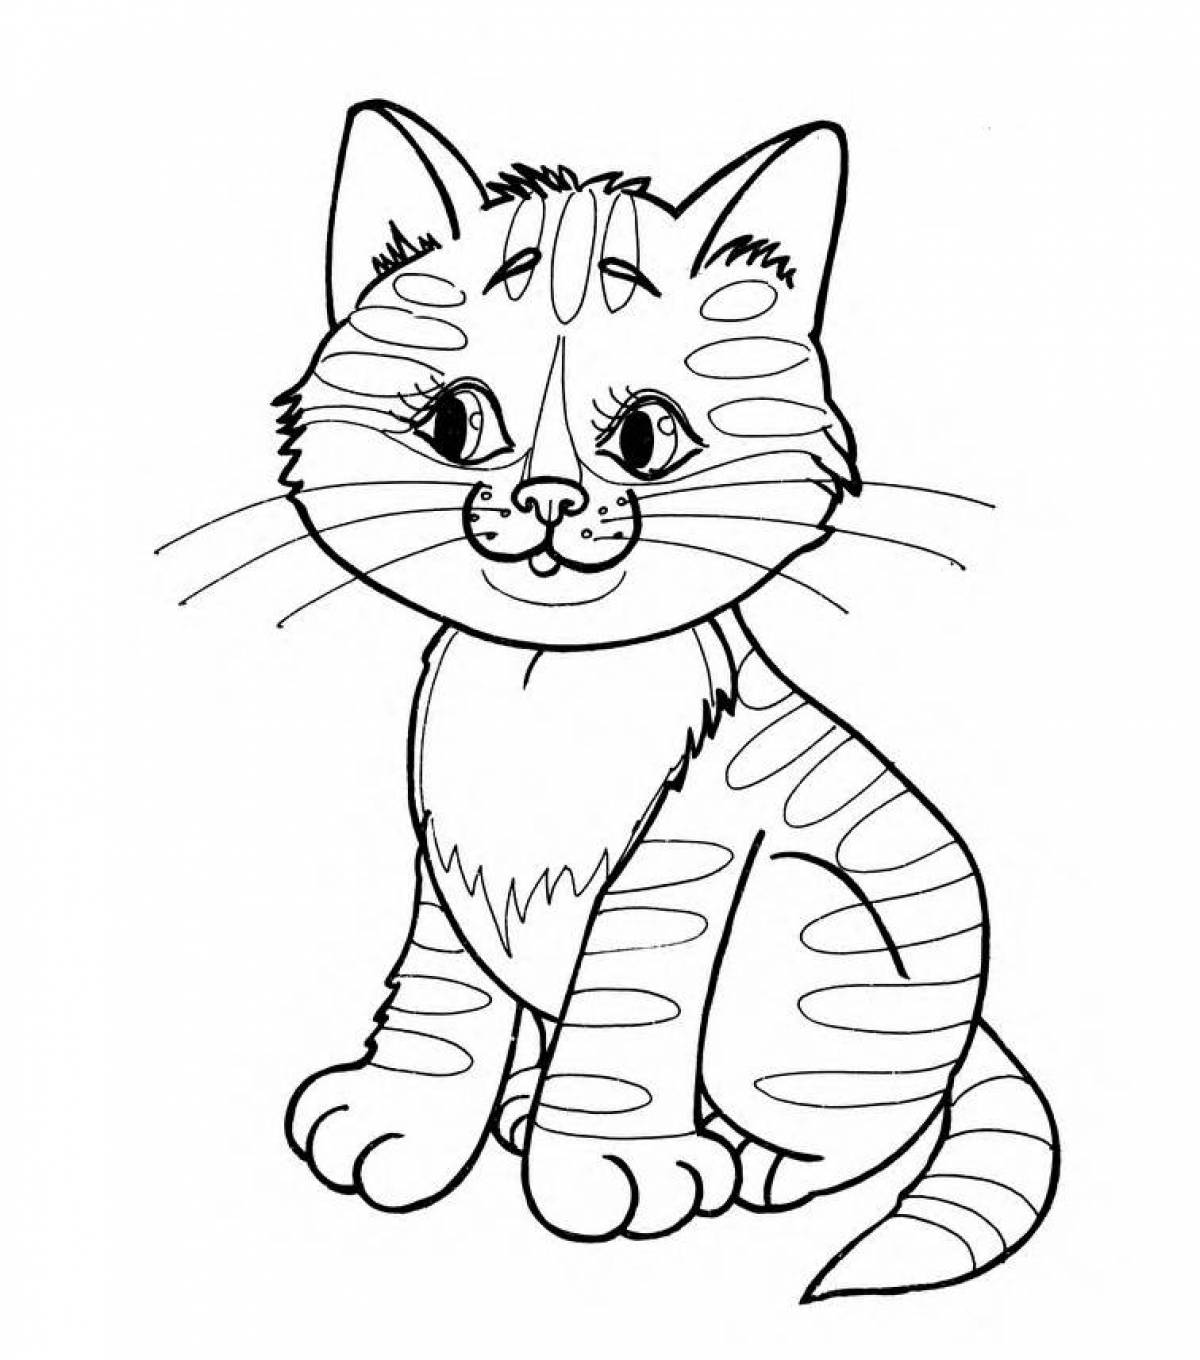 Crazy animal coloring pages for kids 6-7 years old